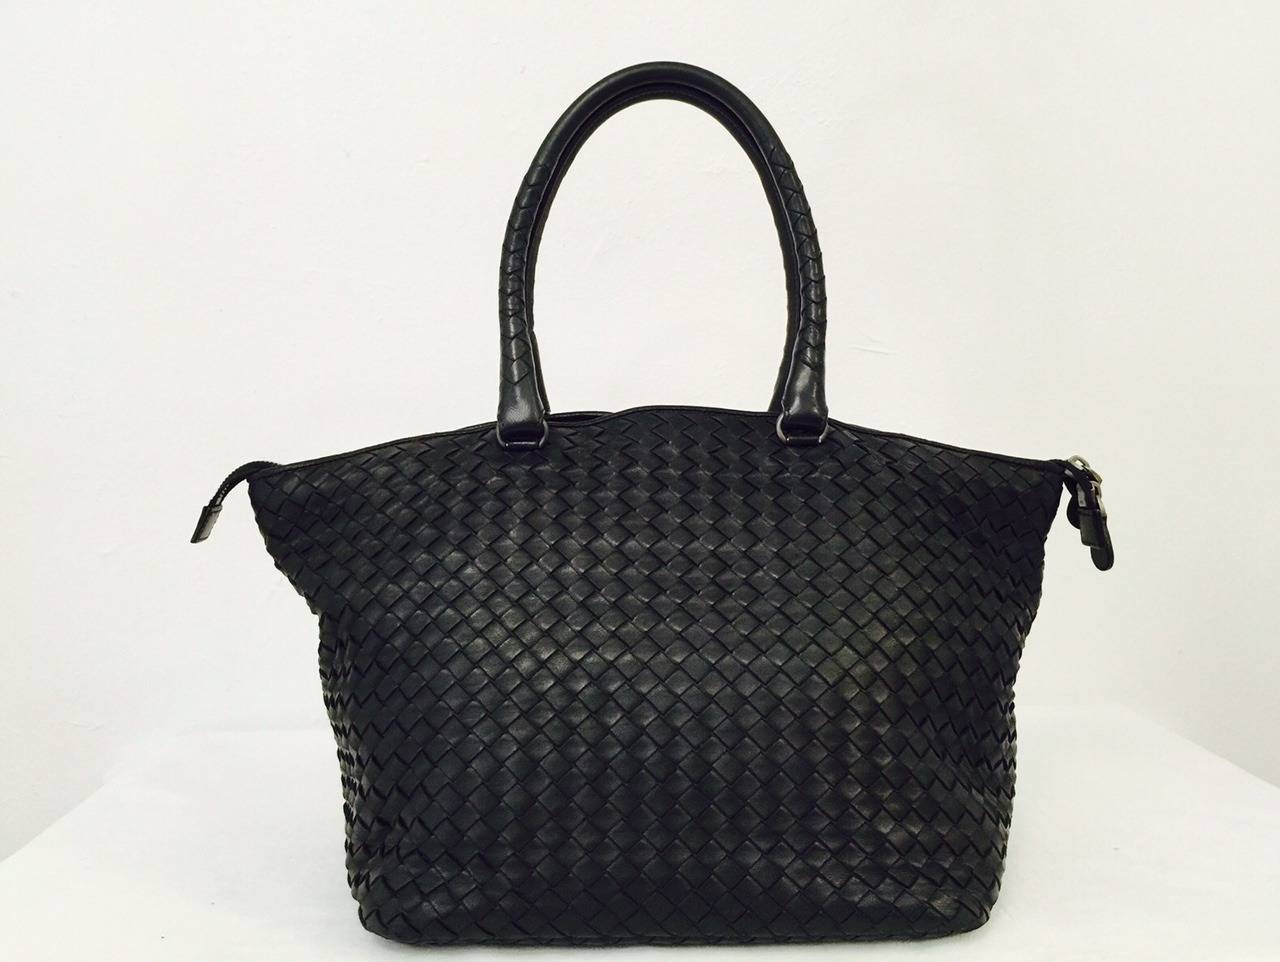 Not your typical tote!  Bottega Veneta Black Leather Tote illustrates why these have become a staple in the wardrobes of the world's most stylish women.  Never garish or overly embellished, Bottega Veneta handbags are renown for sophisticated style